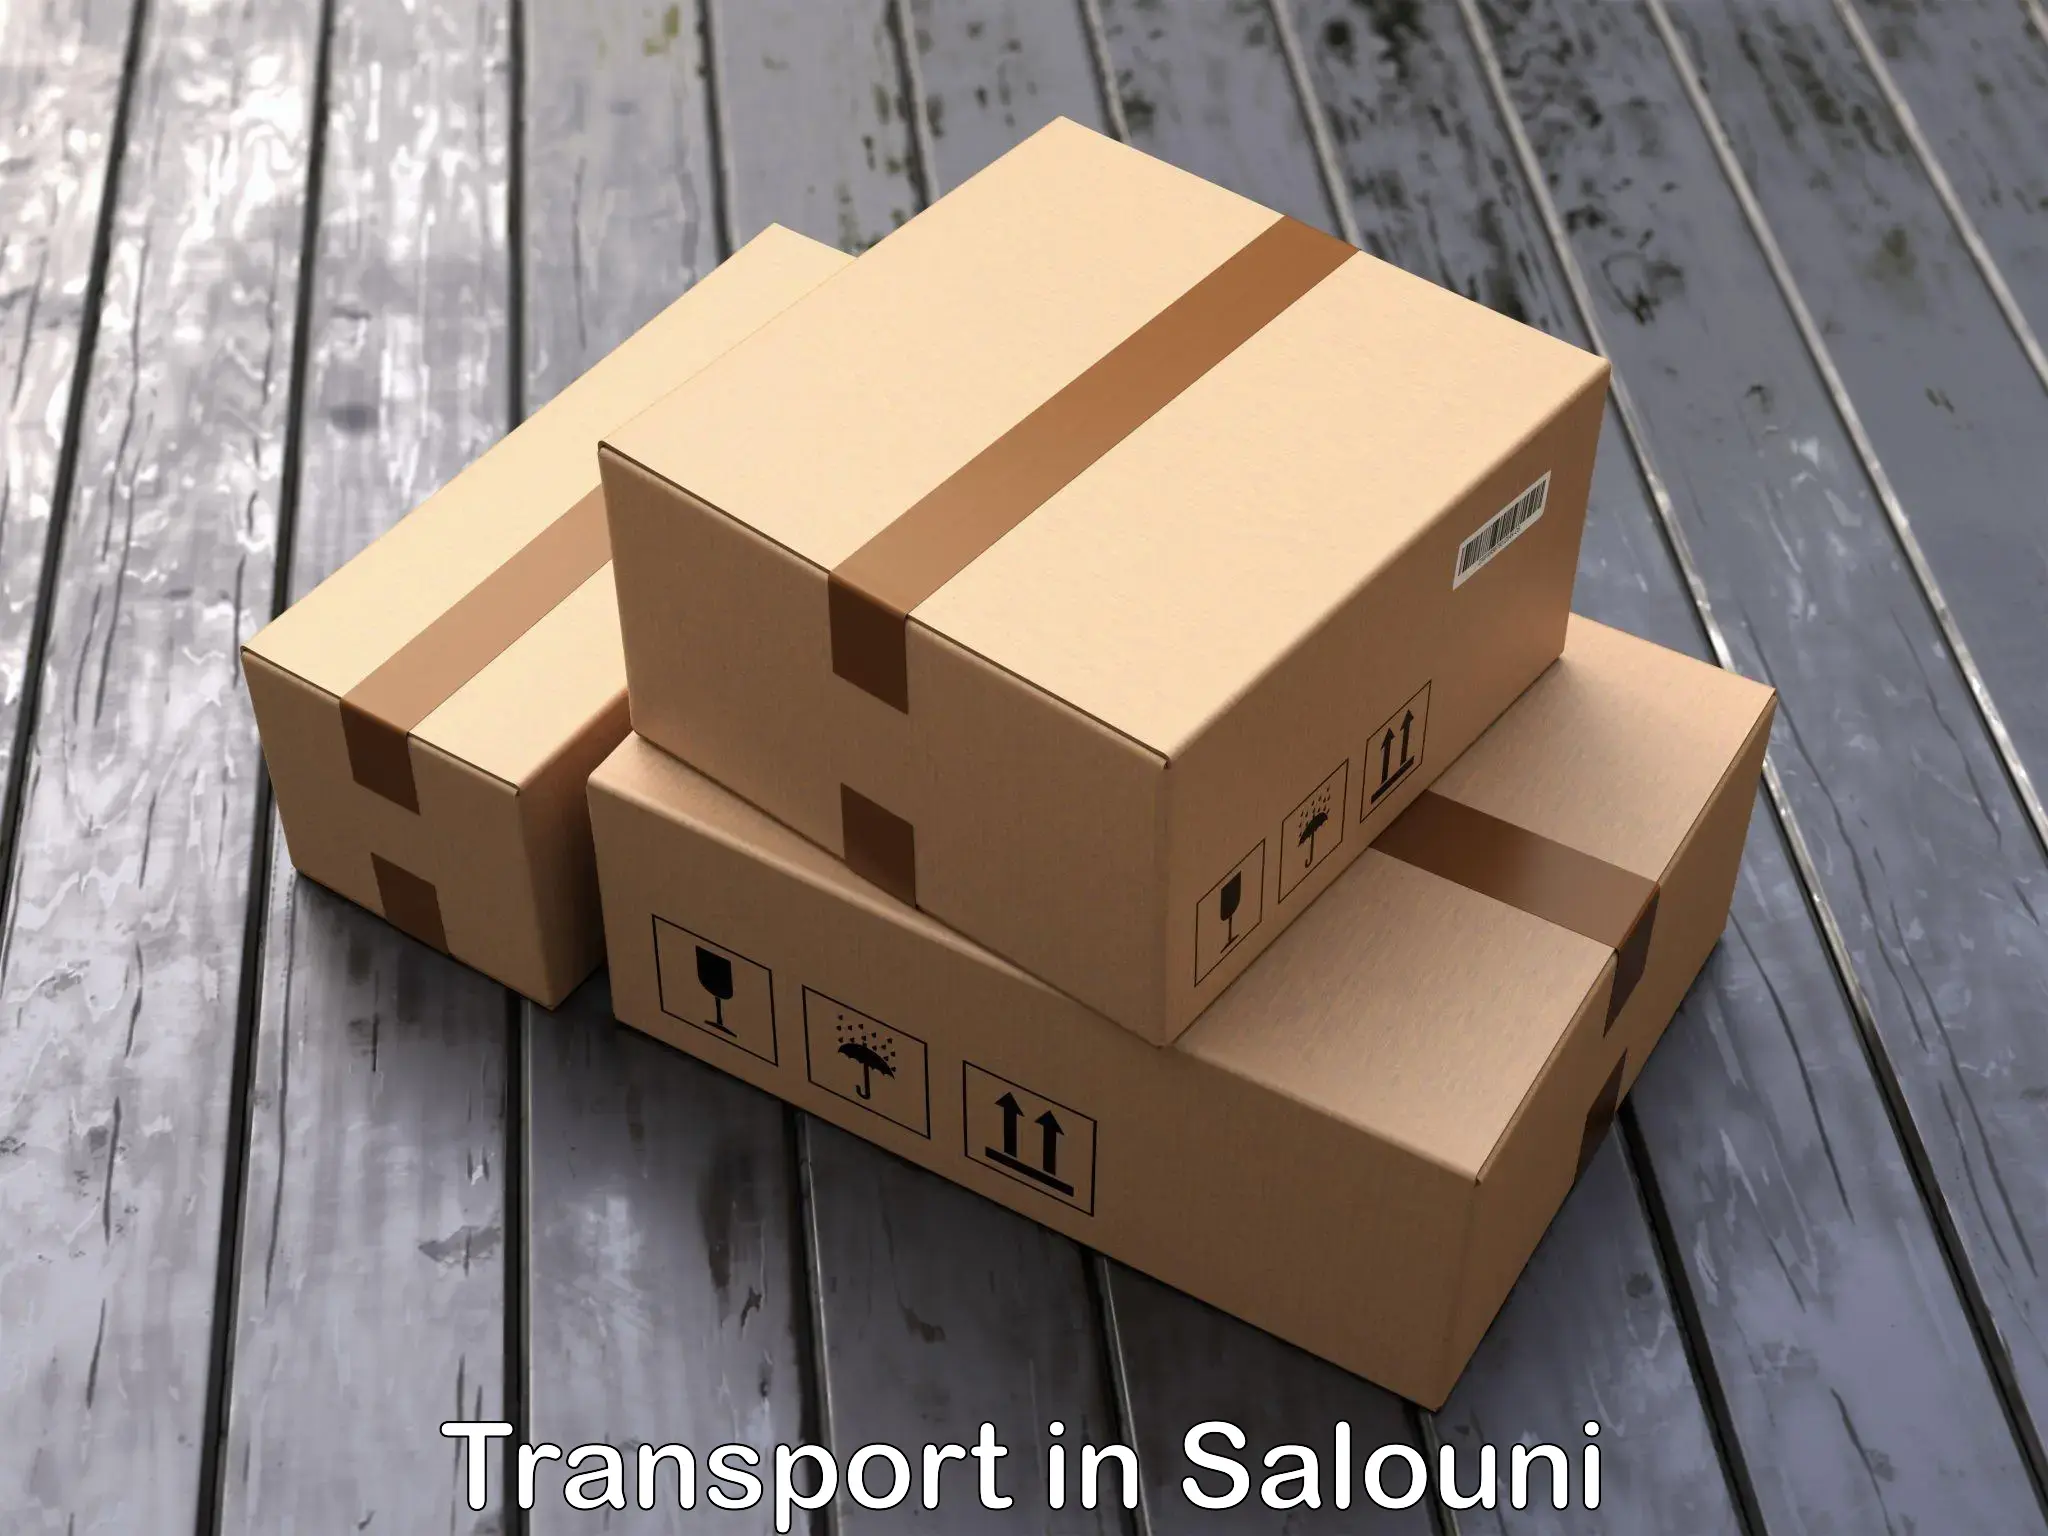 Shipping services in Salouni